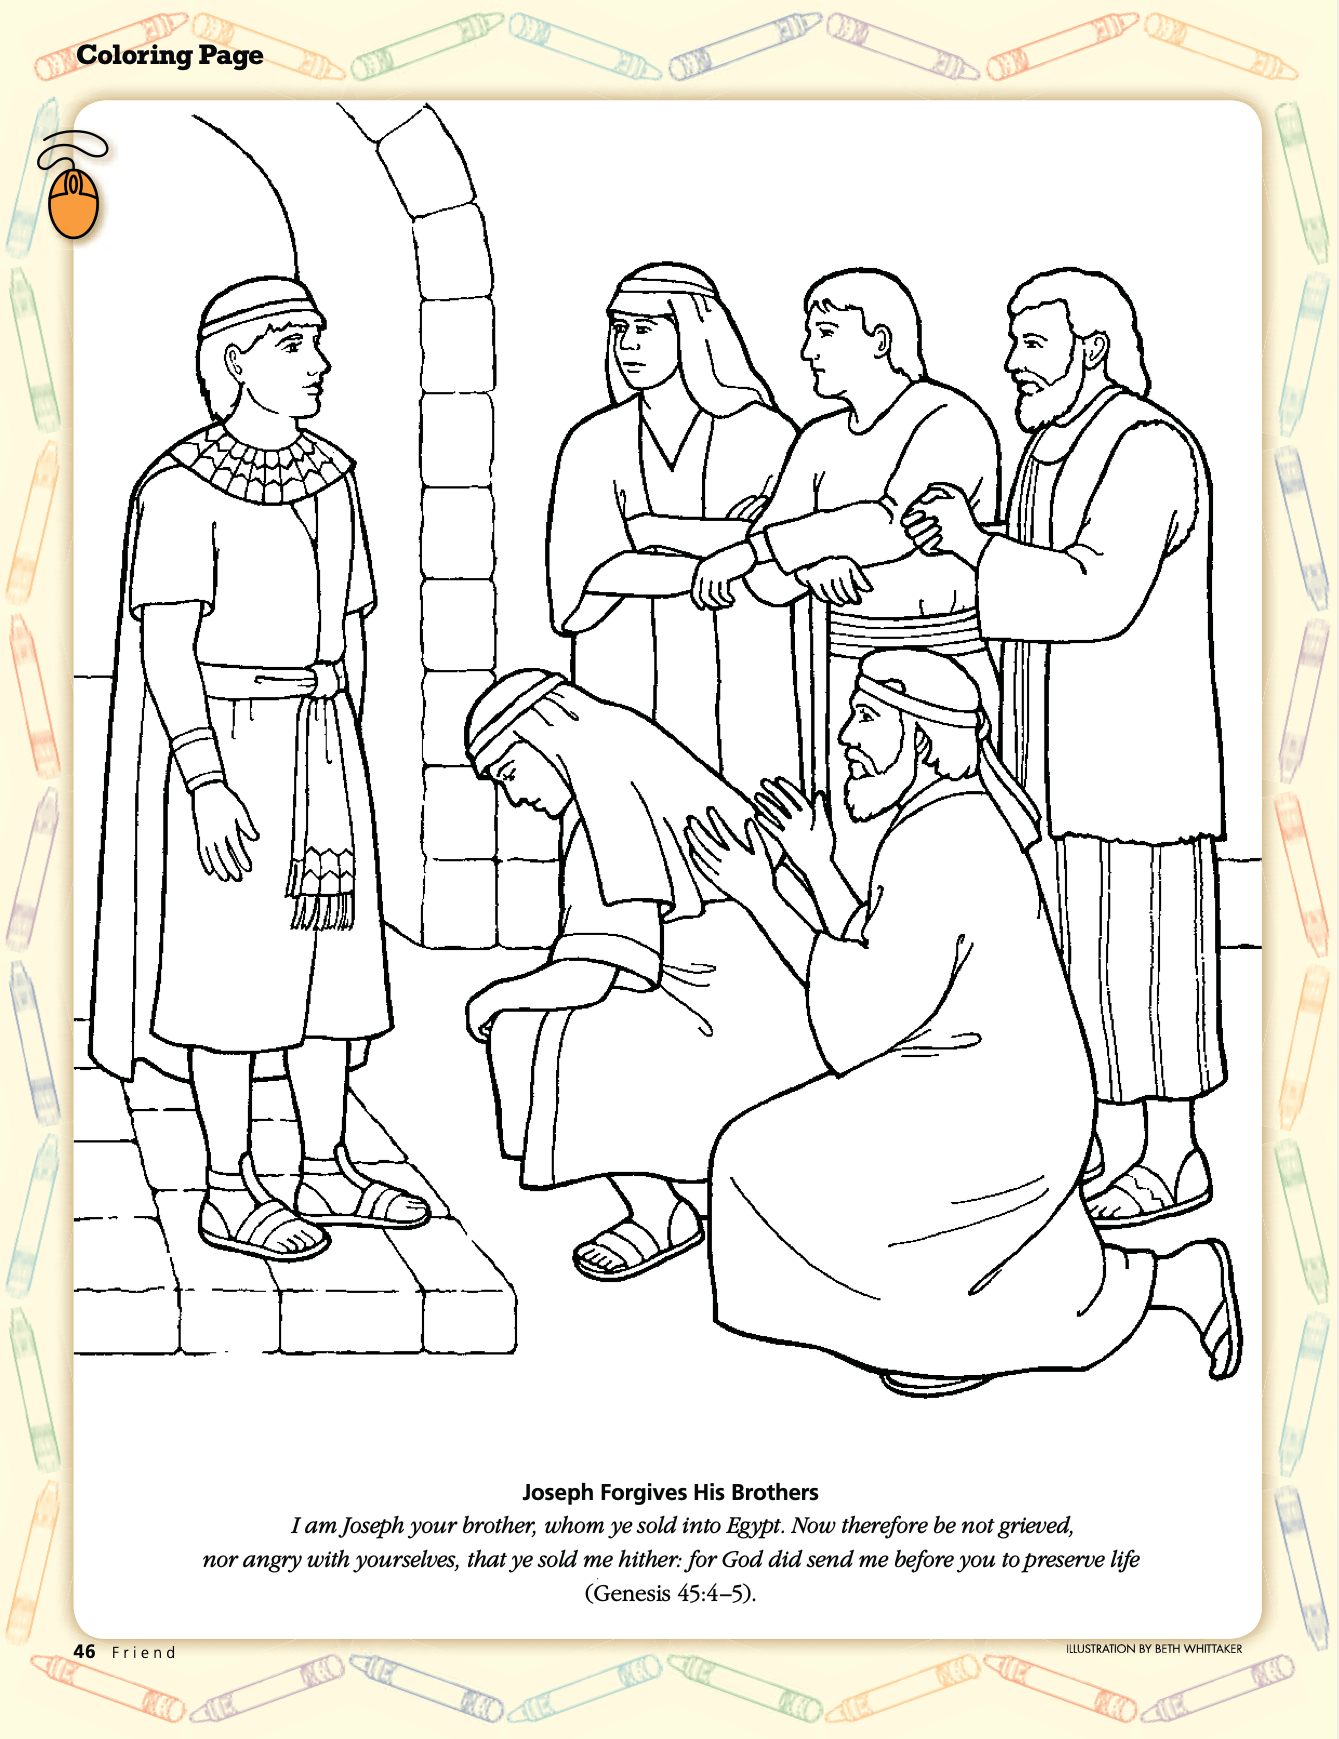 Joseph forgives his brothers archives